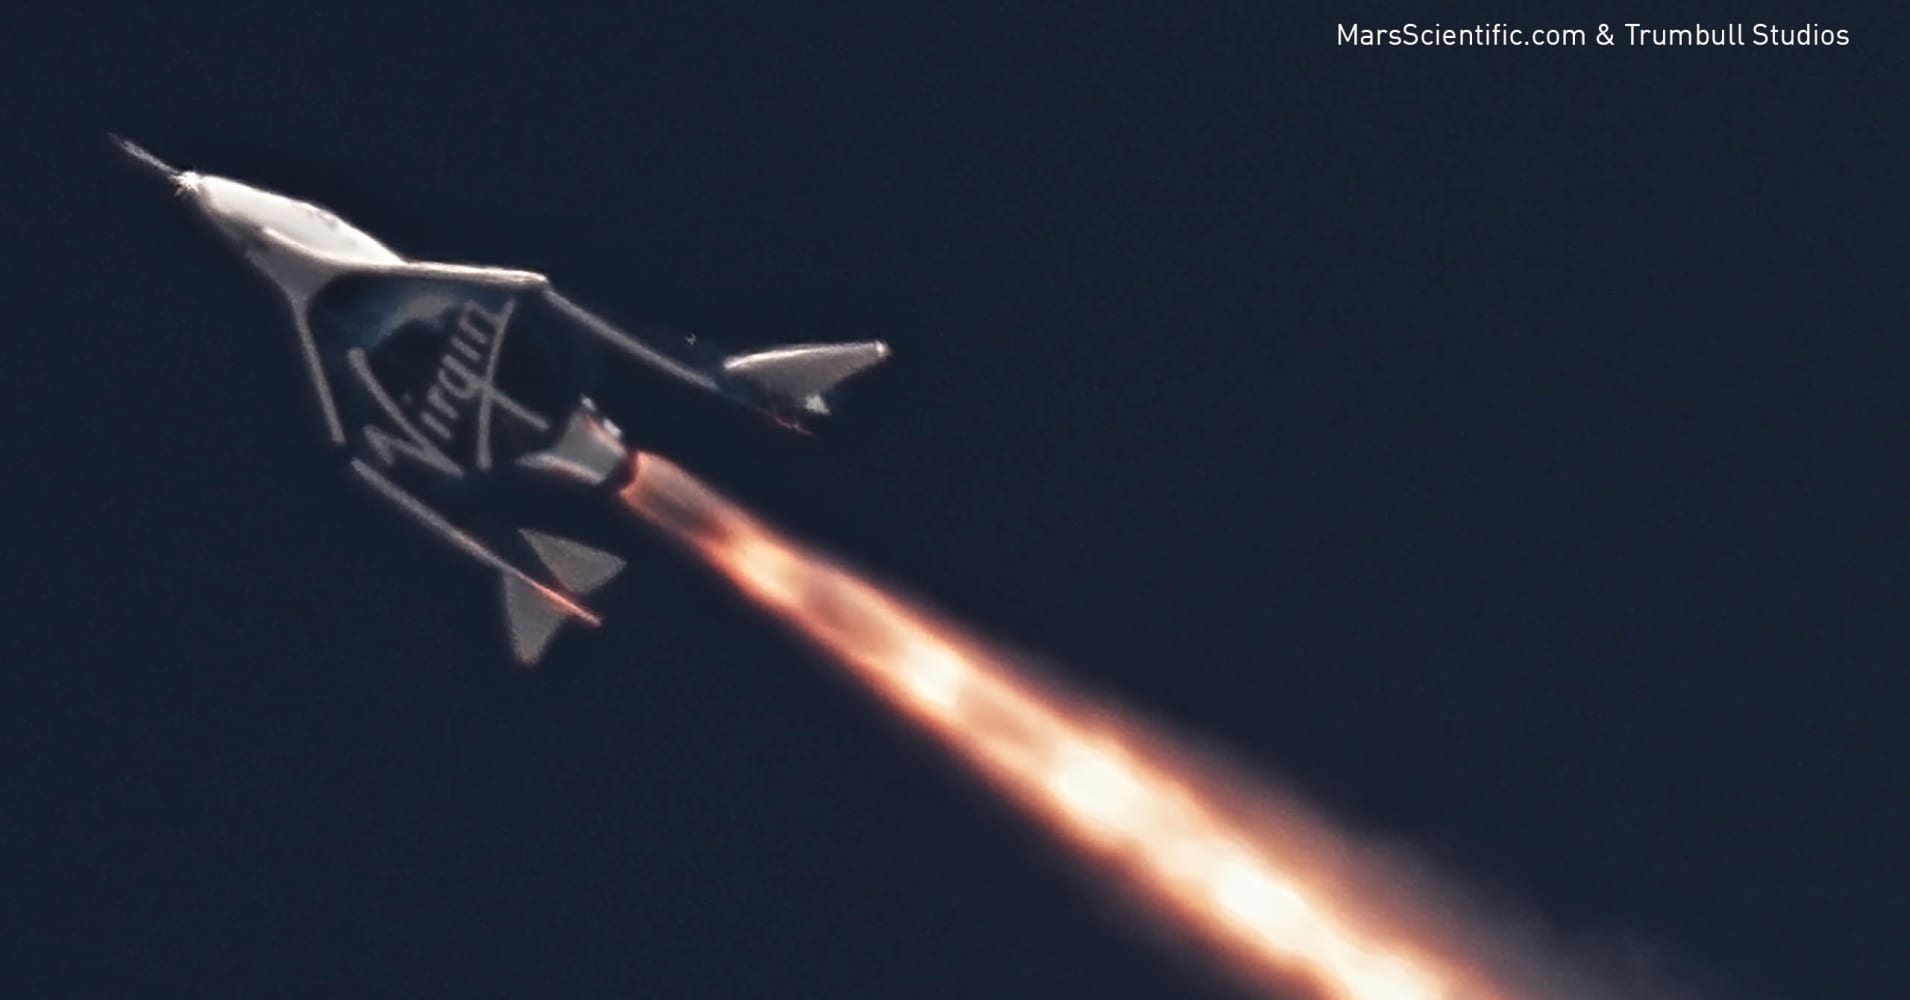 Virgin Galactic steps closer to Richard Branson's dream of routine human spaceflight with second rocket launch